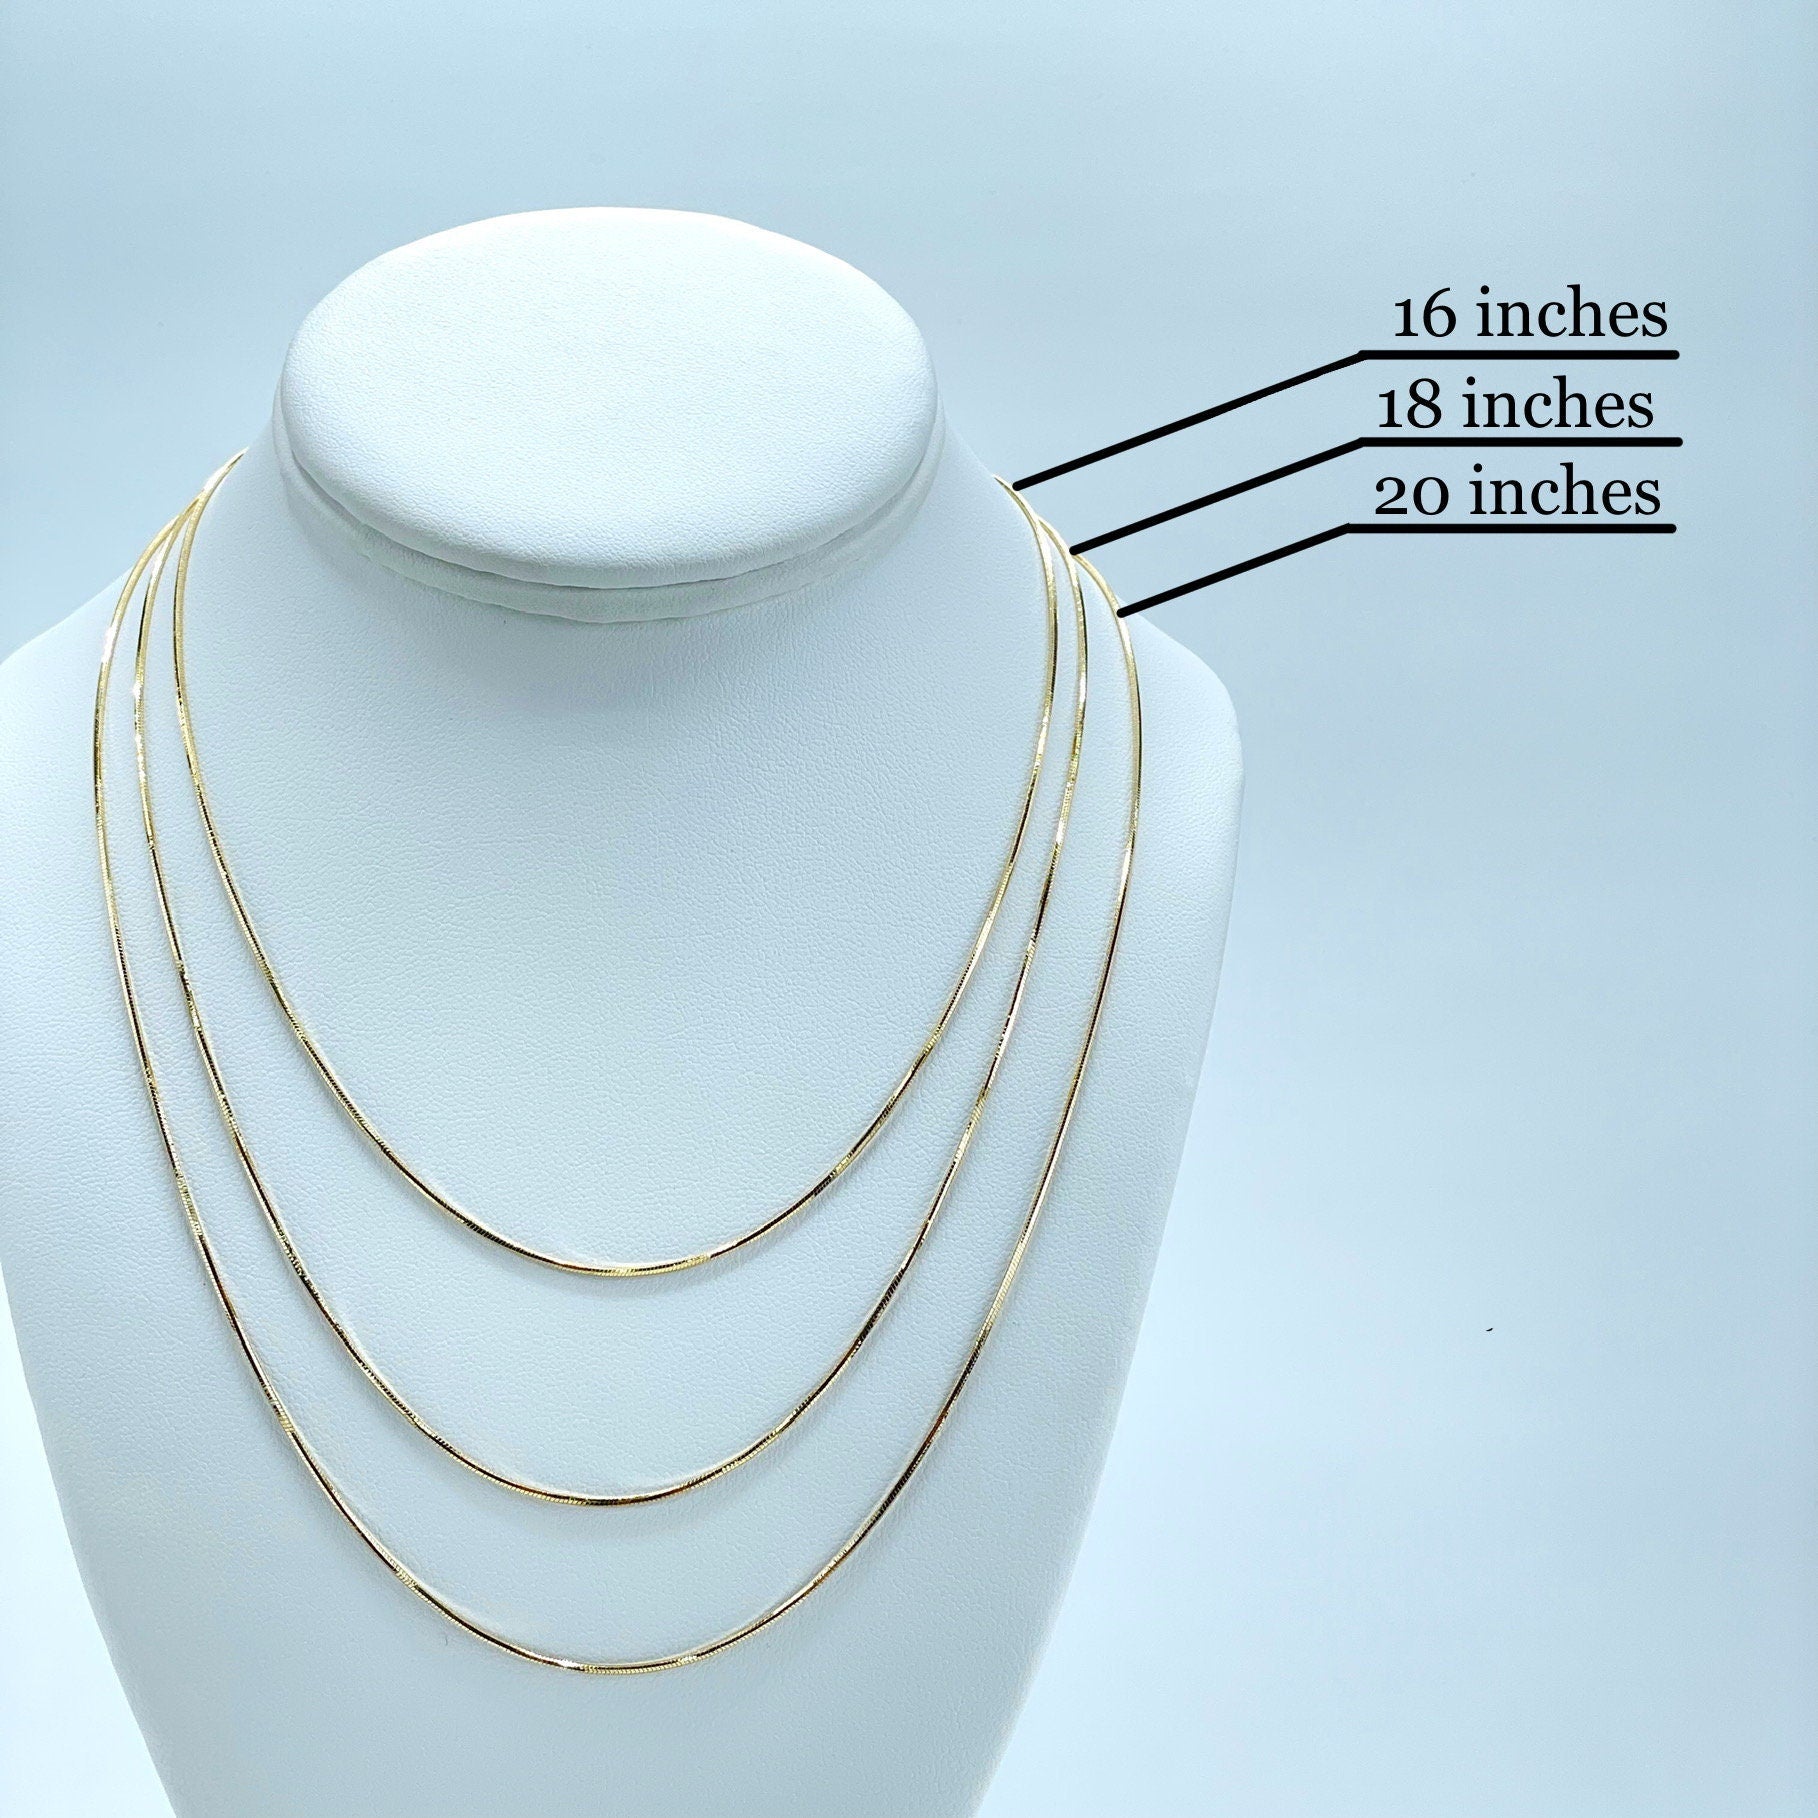 Leslie's 14K Rose Gold 1mm Wheat Chain Necklace - Length 20'' inches -  (B18-484) - Roy Rose Jewelry